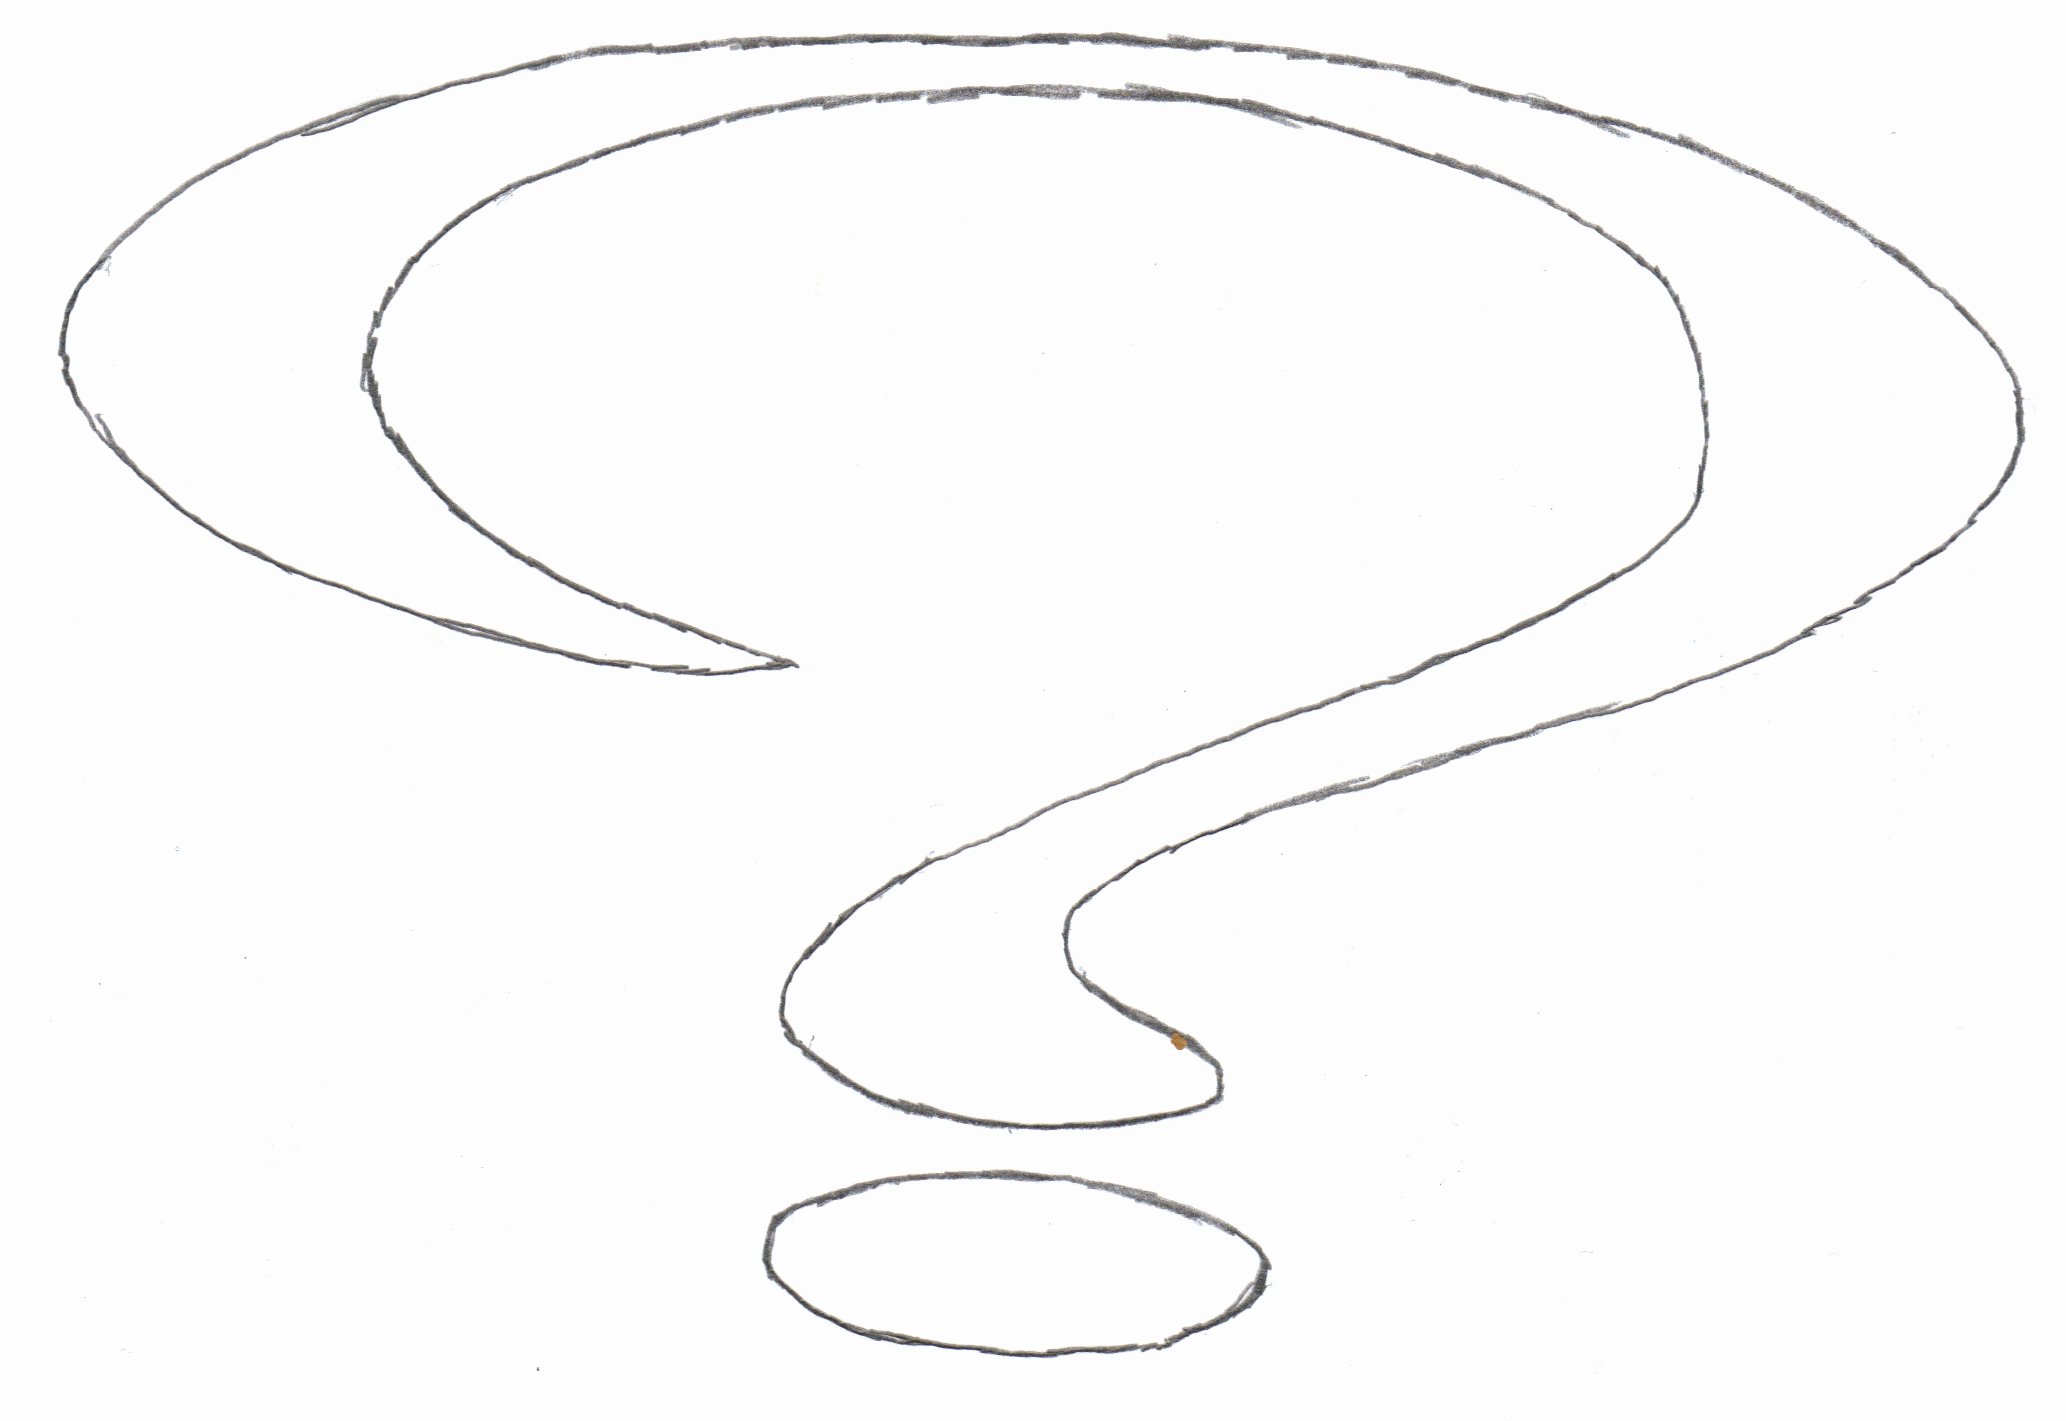 The Riddler Question Mark Template Unique From the Riddler Question Mark